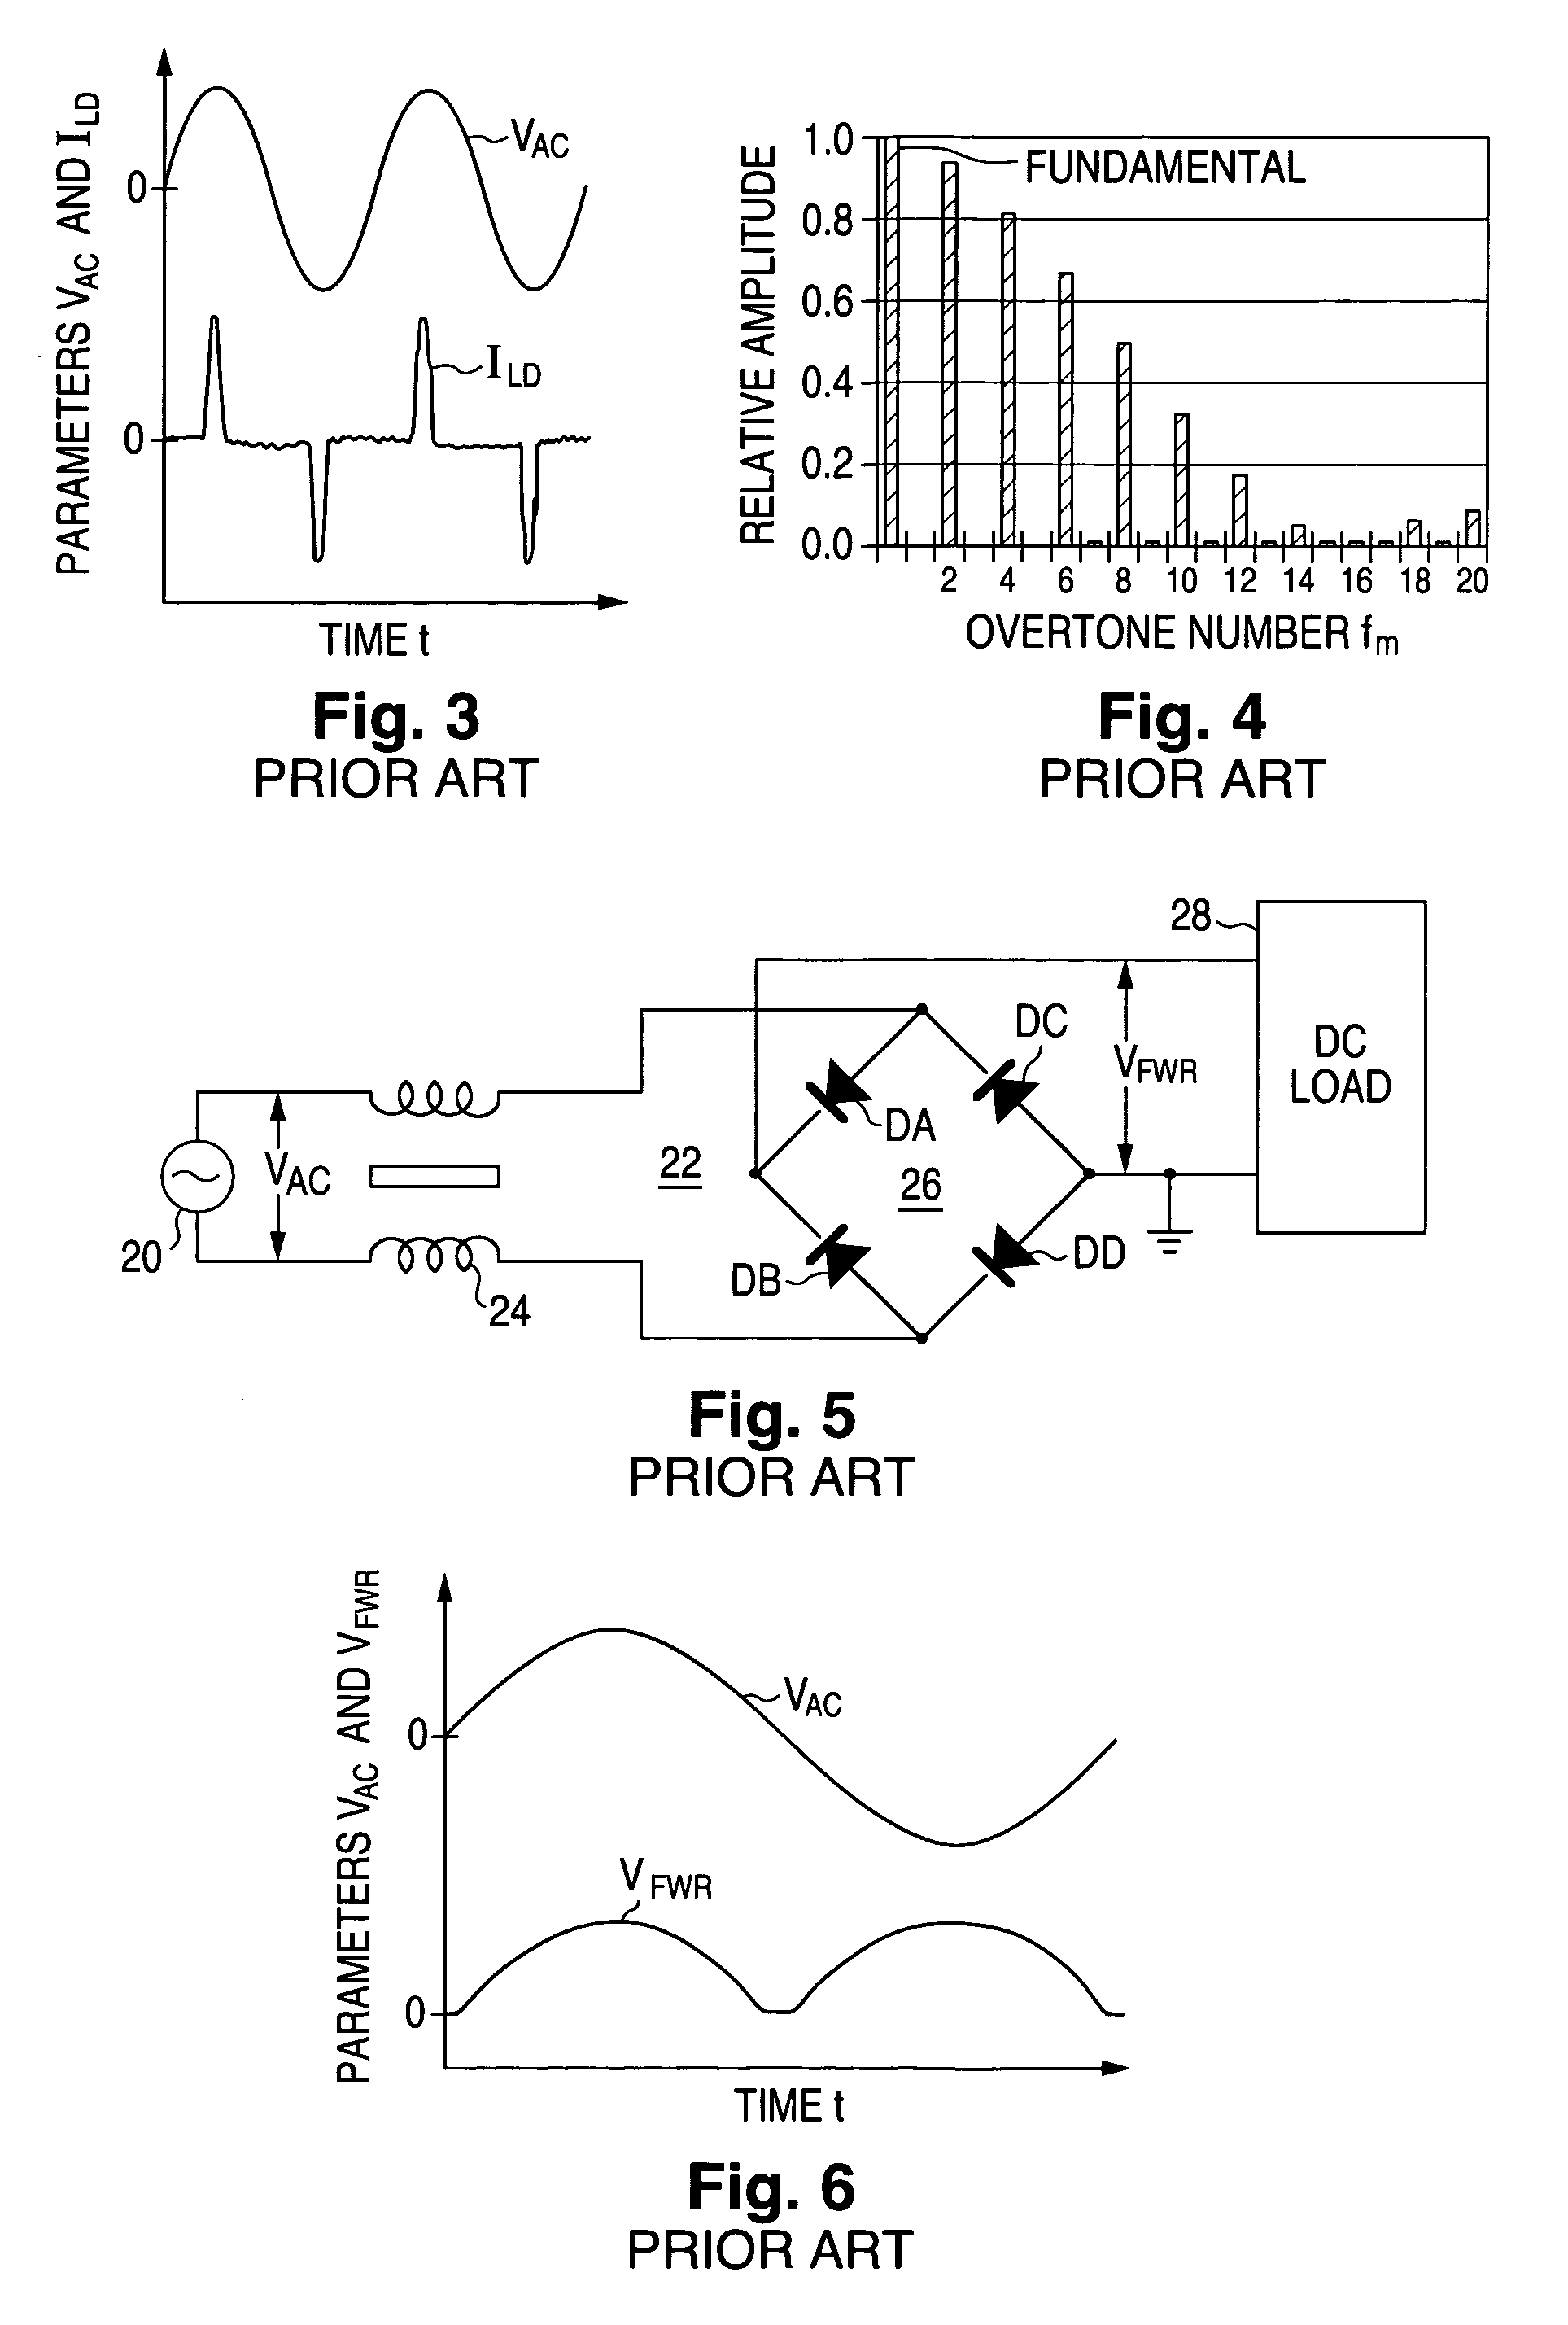 Power factor correction by measurement and removal of overtones